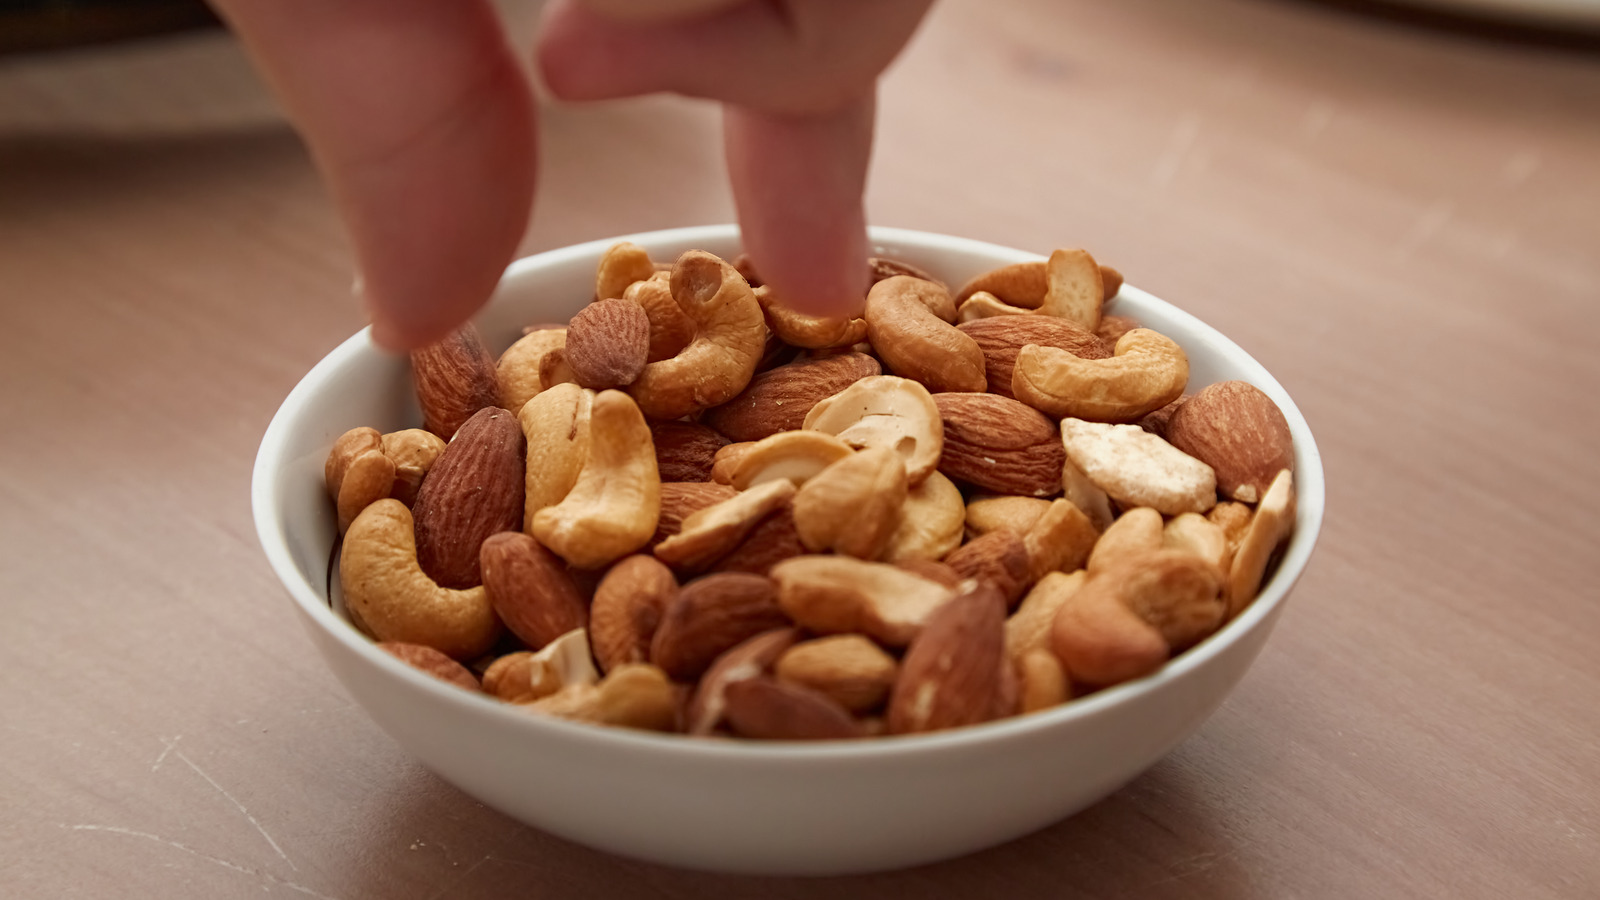 Can Cashews Help You Lose Weight? The Answer Isn't What You'd Expect - Health Digest